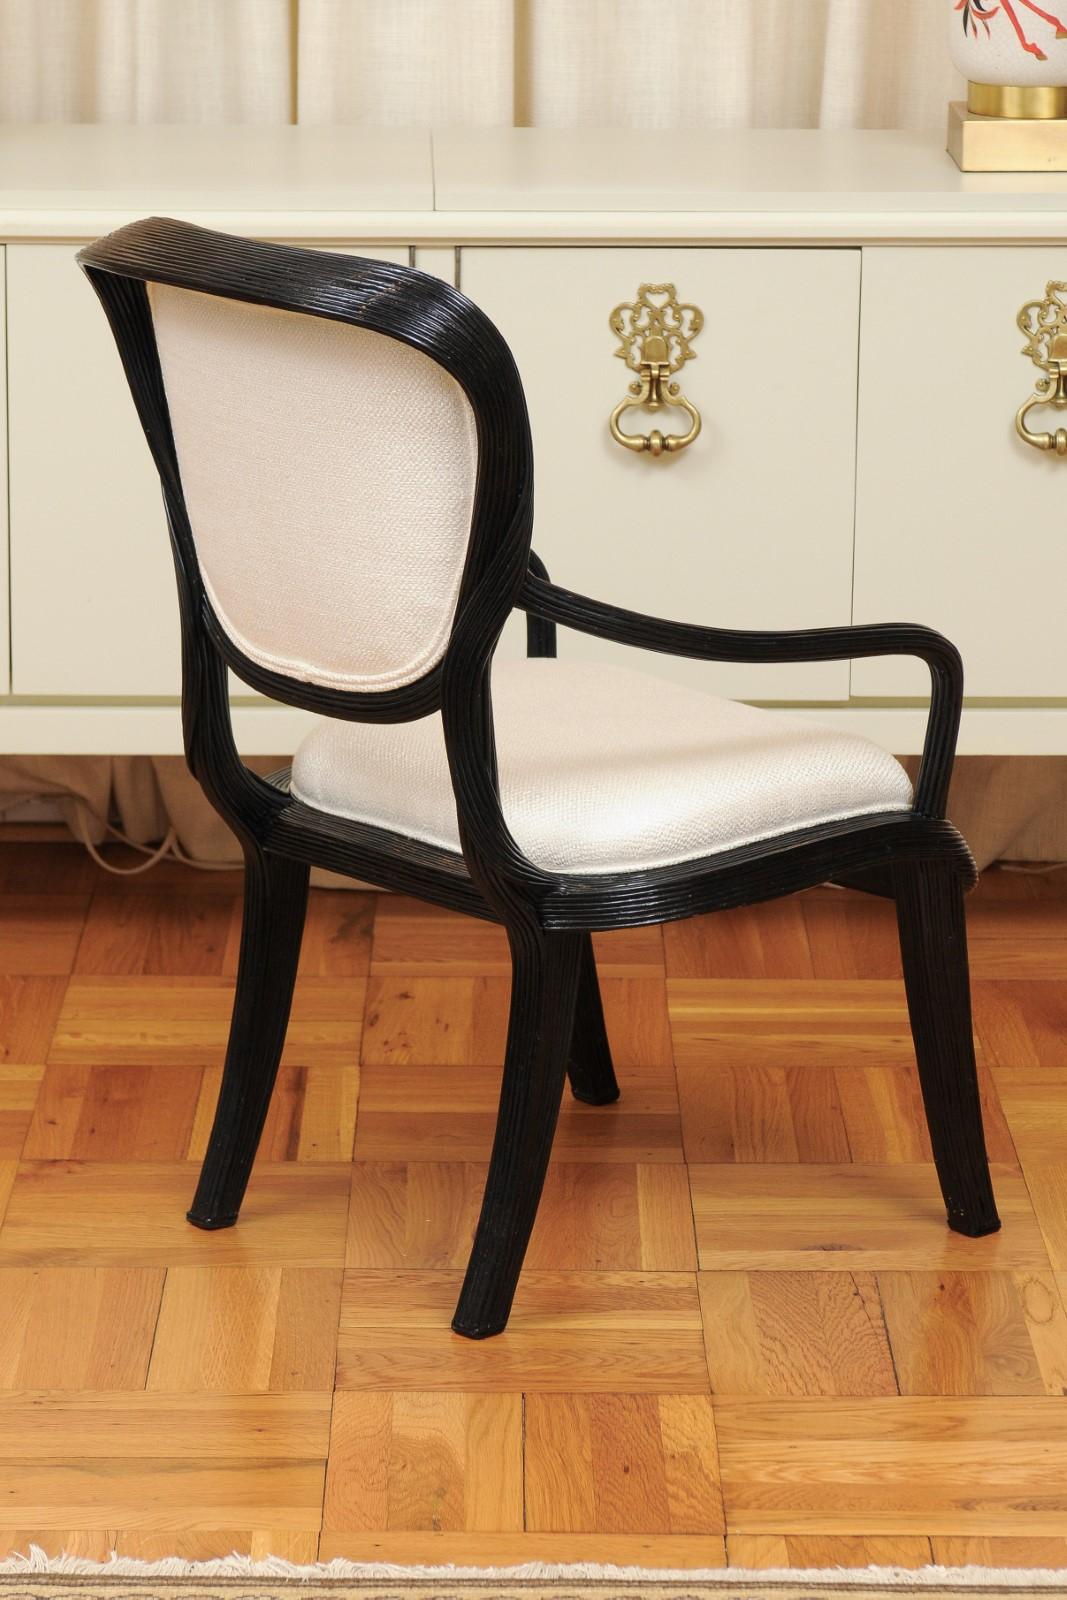 Extraordinary Set of 8 Trompe L'oiel Dining Chairs by Betty Cobonpue, circa 1980 For Sale 8